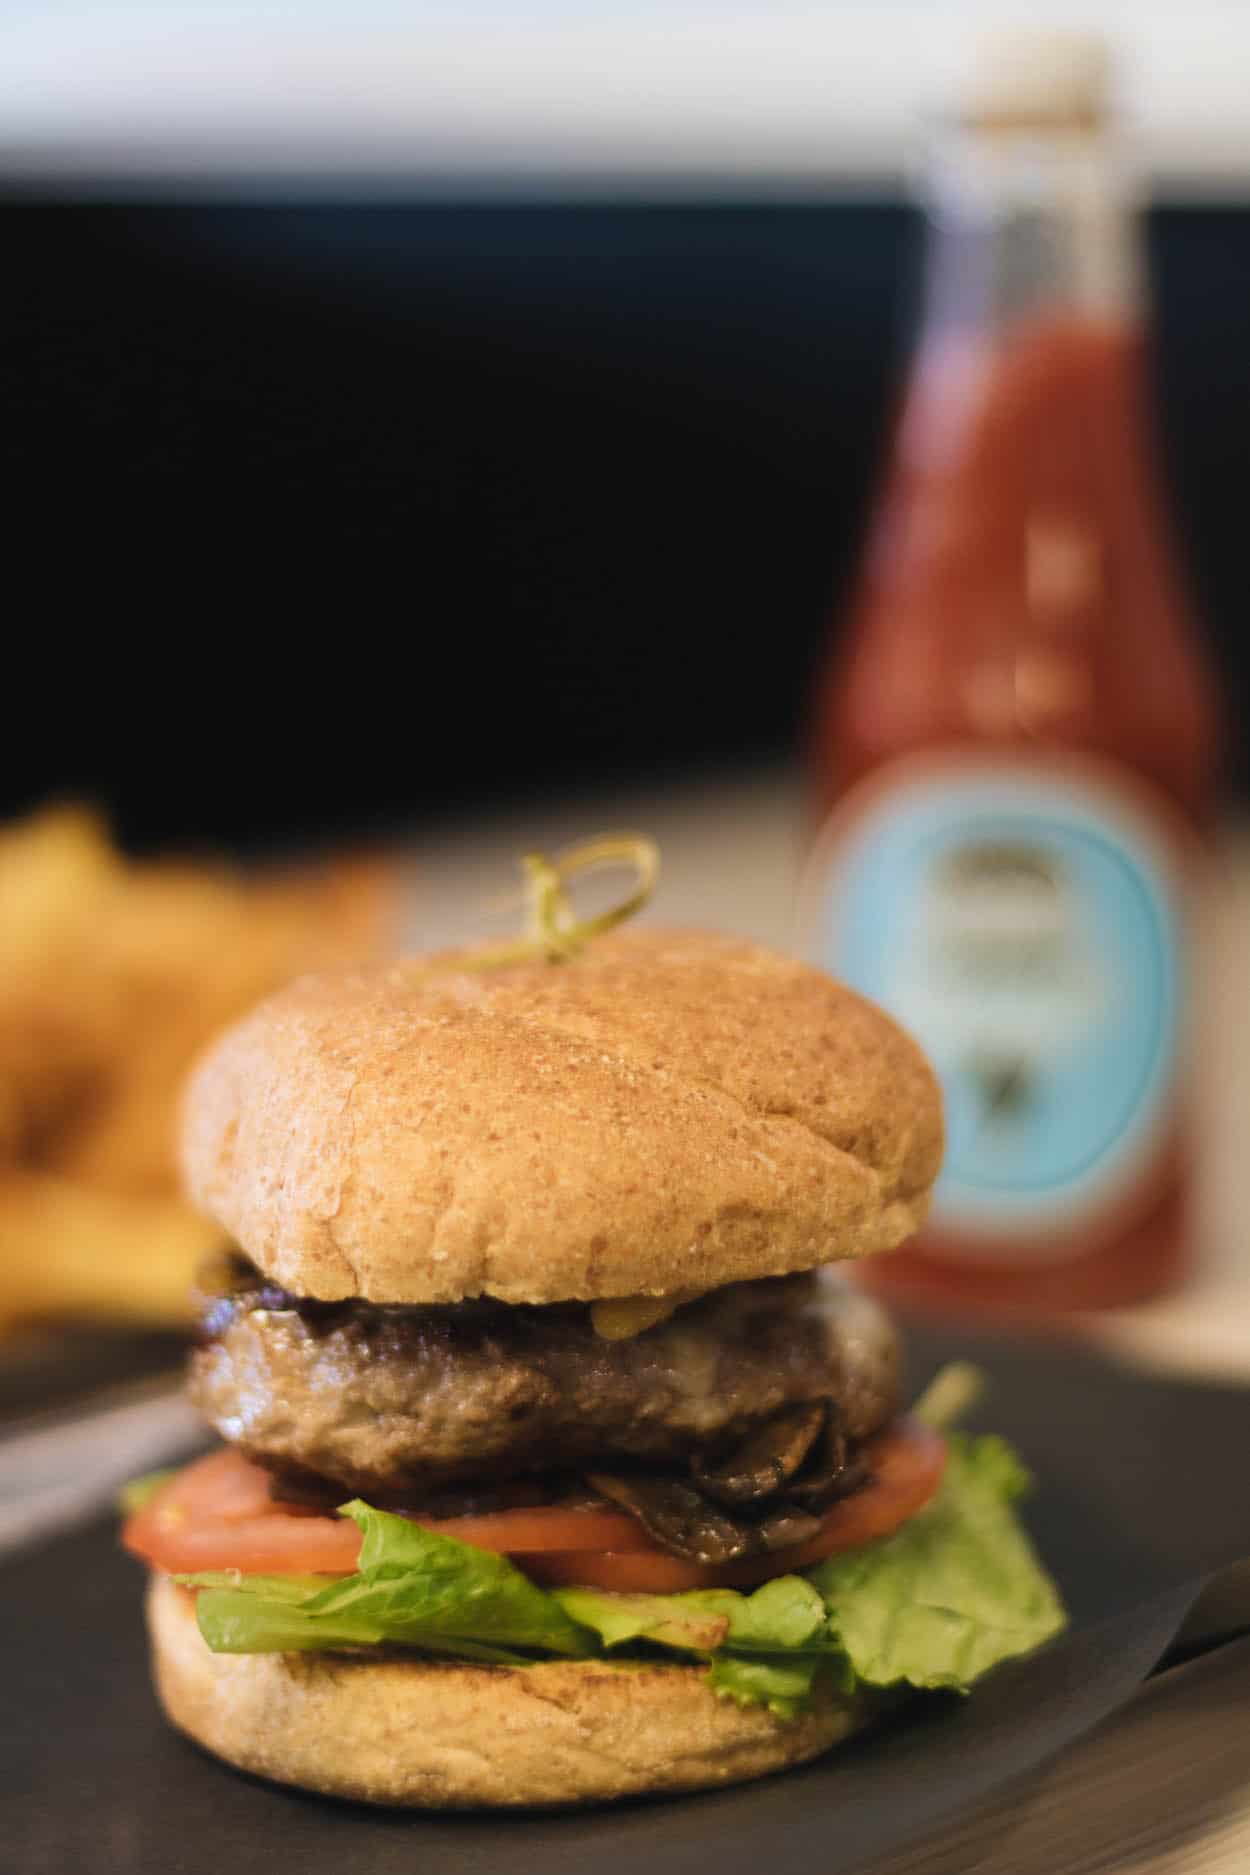 A photo of the Zeus Burger with lettuce, tomato, carmalized onions, sauteed mushrooms, and cheddar cheese in front of a bottle of ketchup